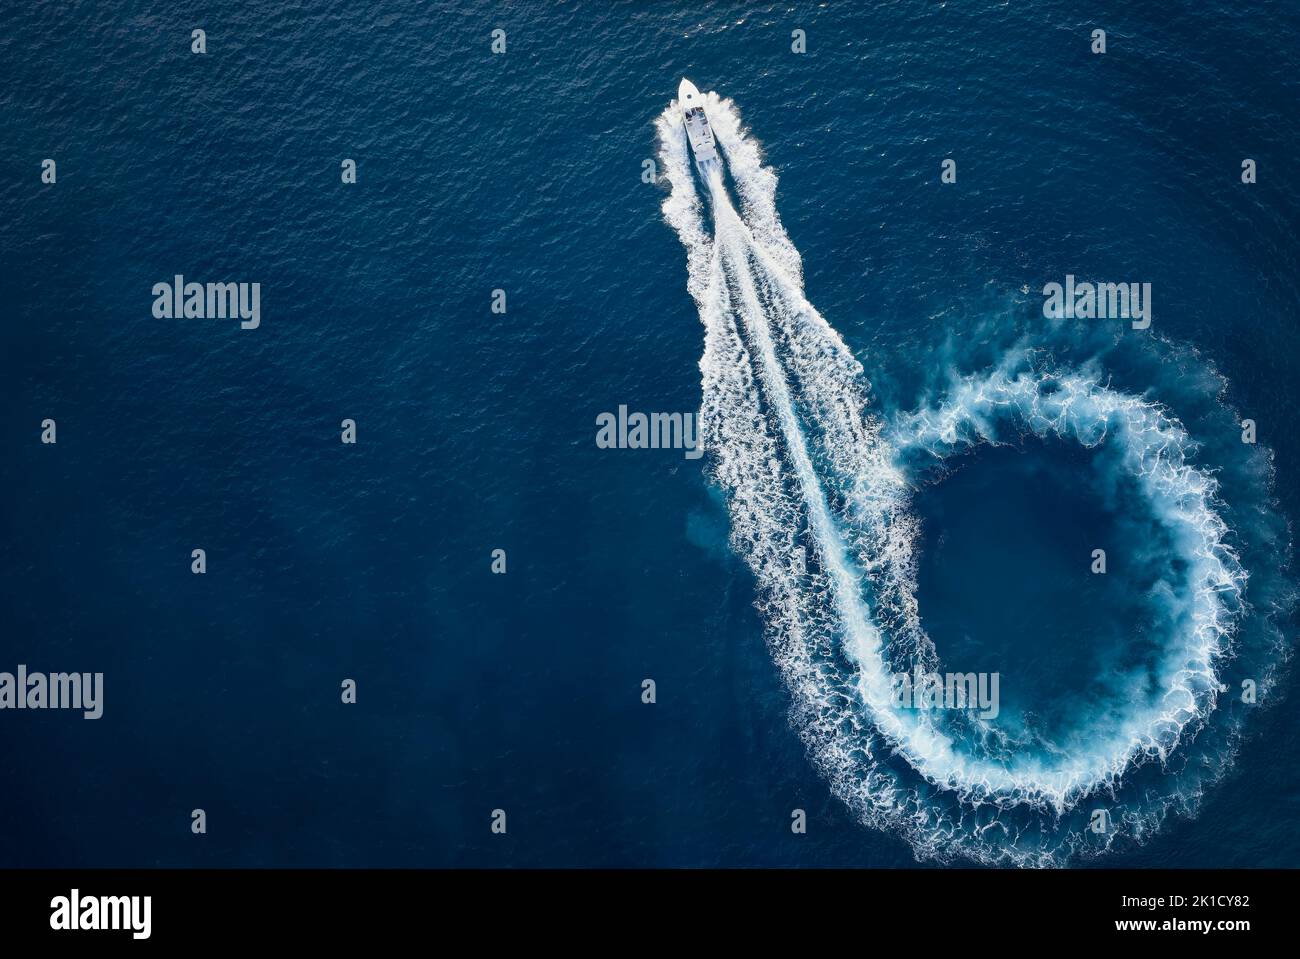 Aerial top view of a motor powerboat forming a circle of waves Stock Photo